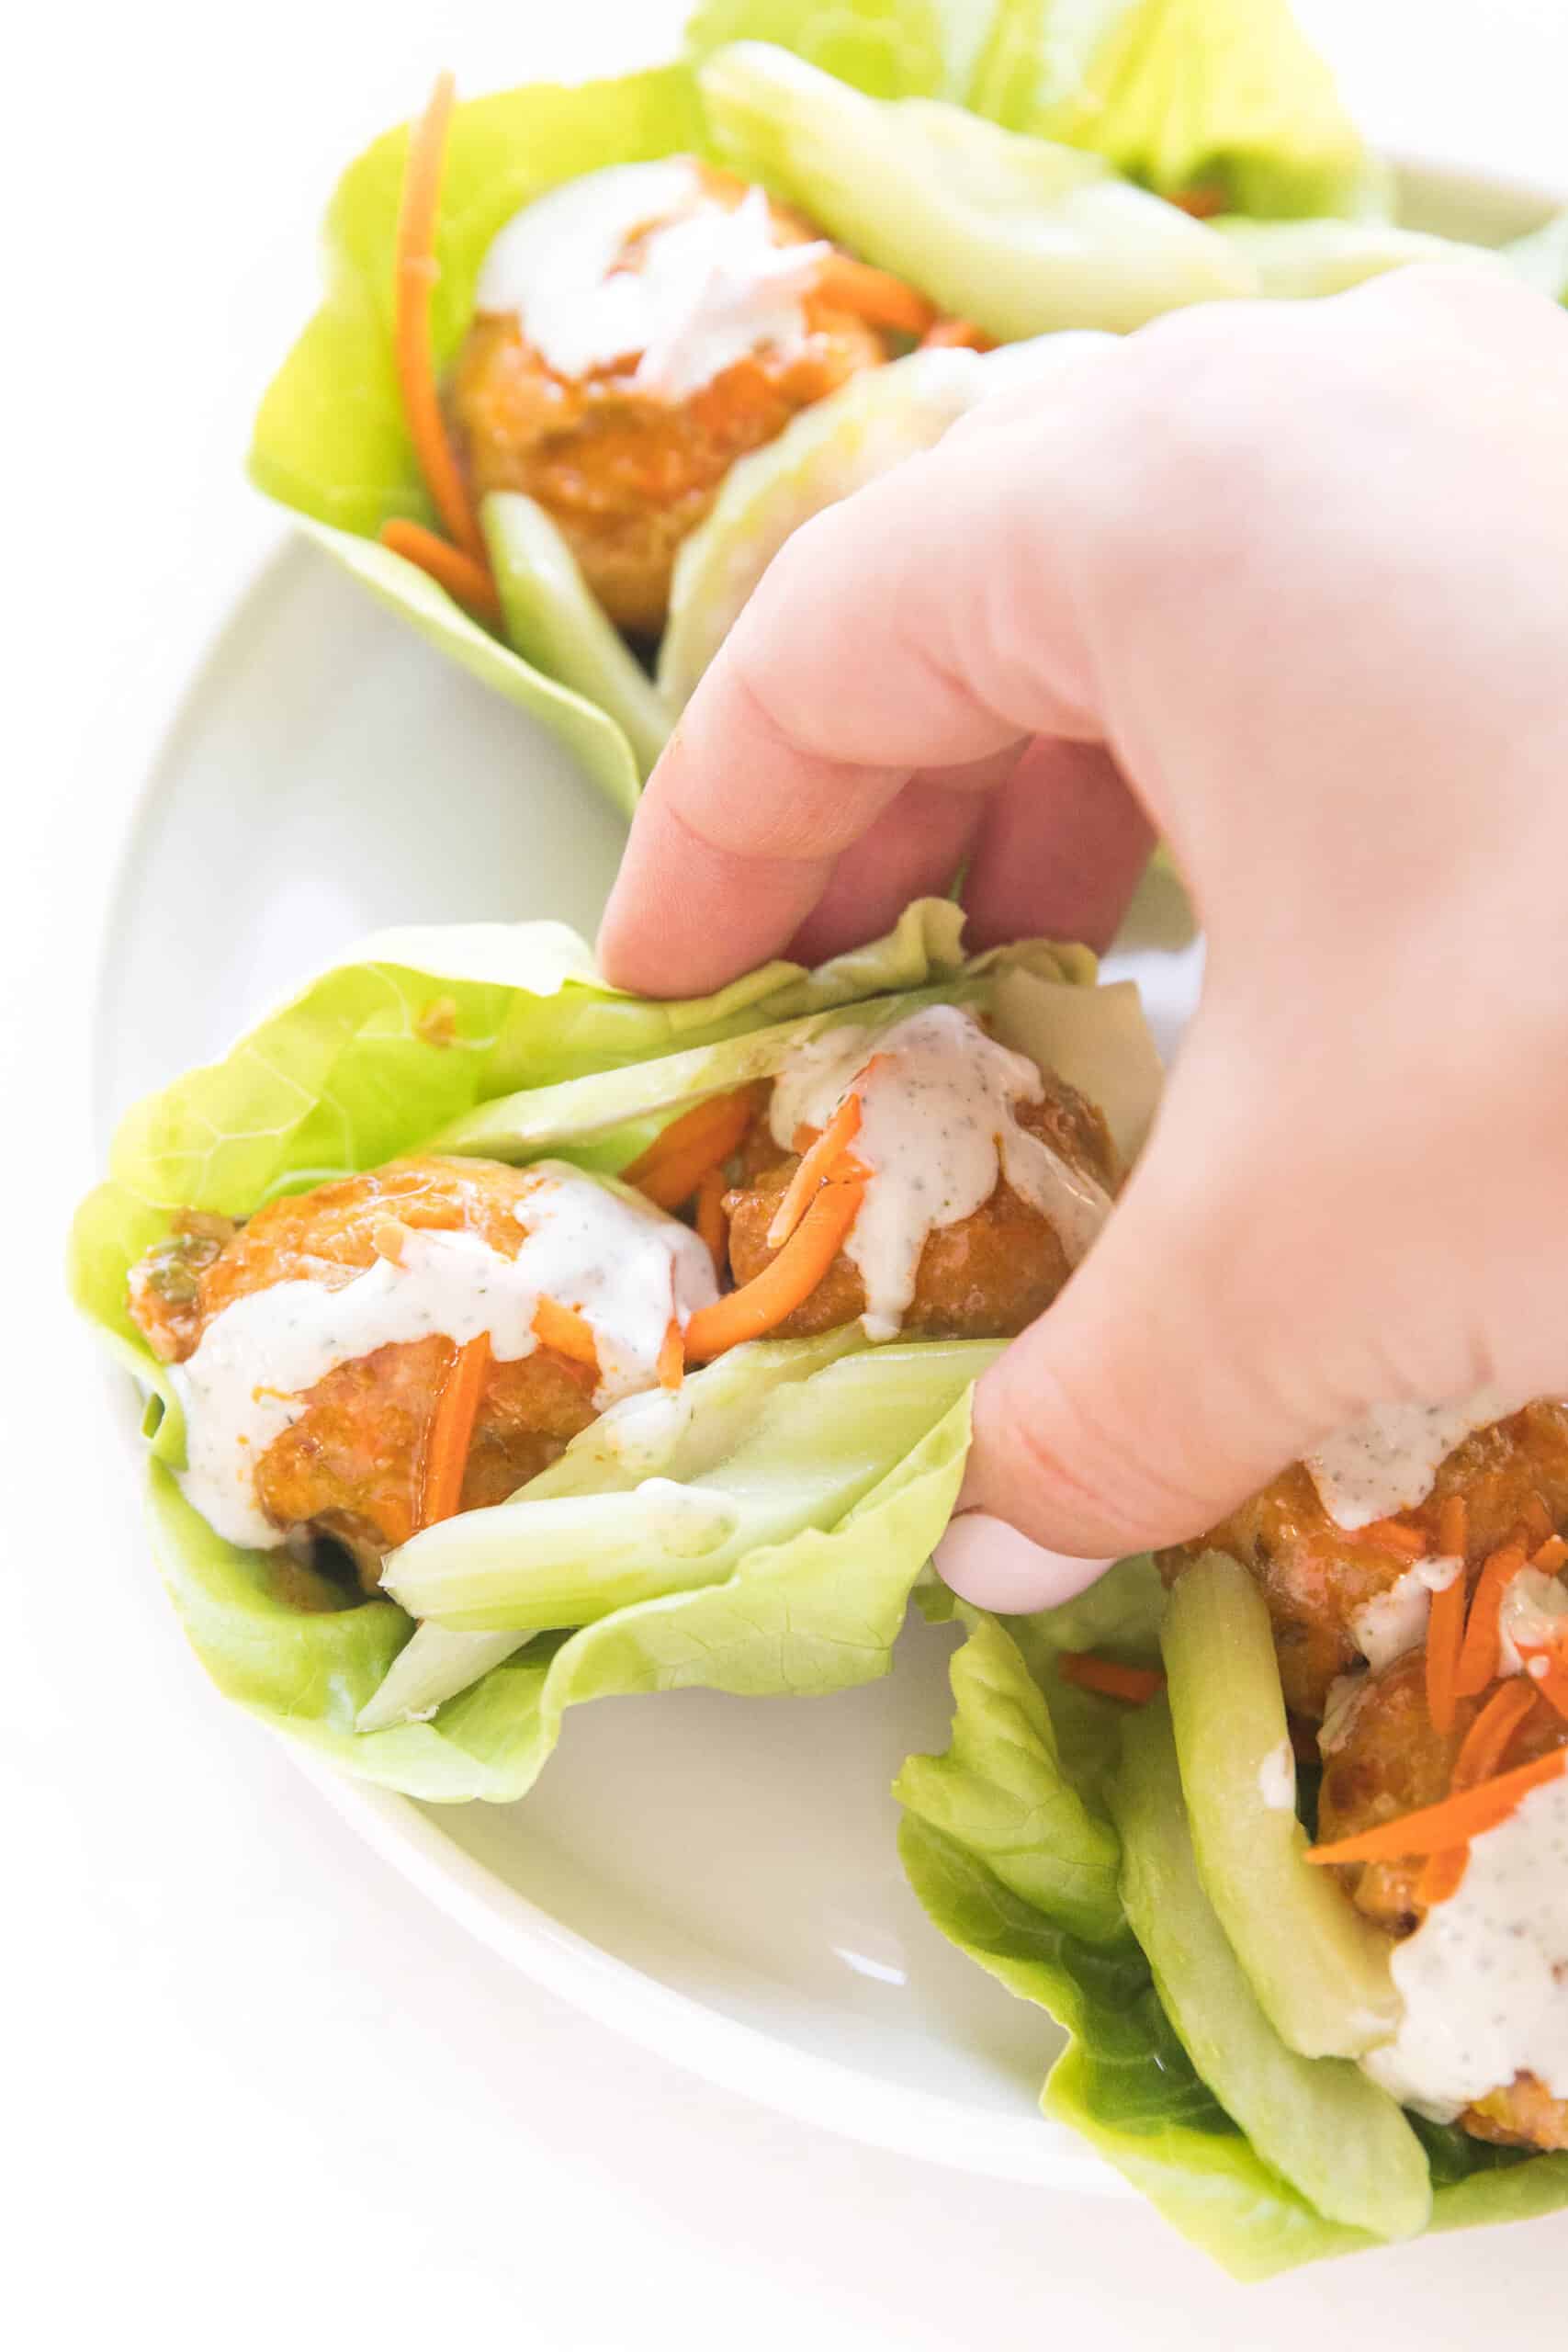 hand grabbing picking up keto buffalo turkey meatballs on lettuce wraps topped with ranch dressing on a white plate and background